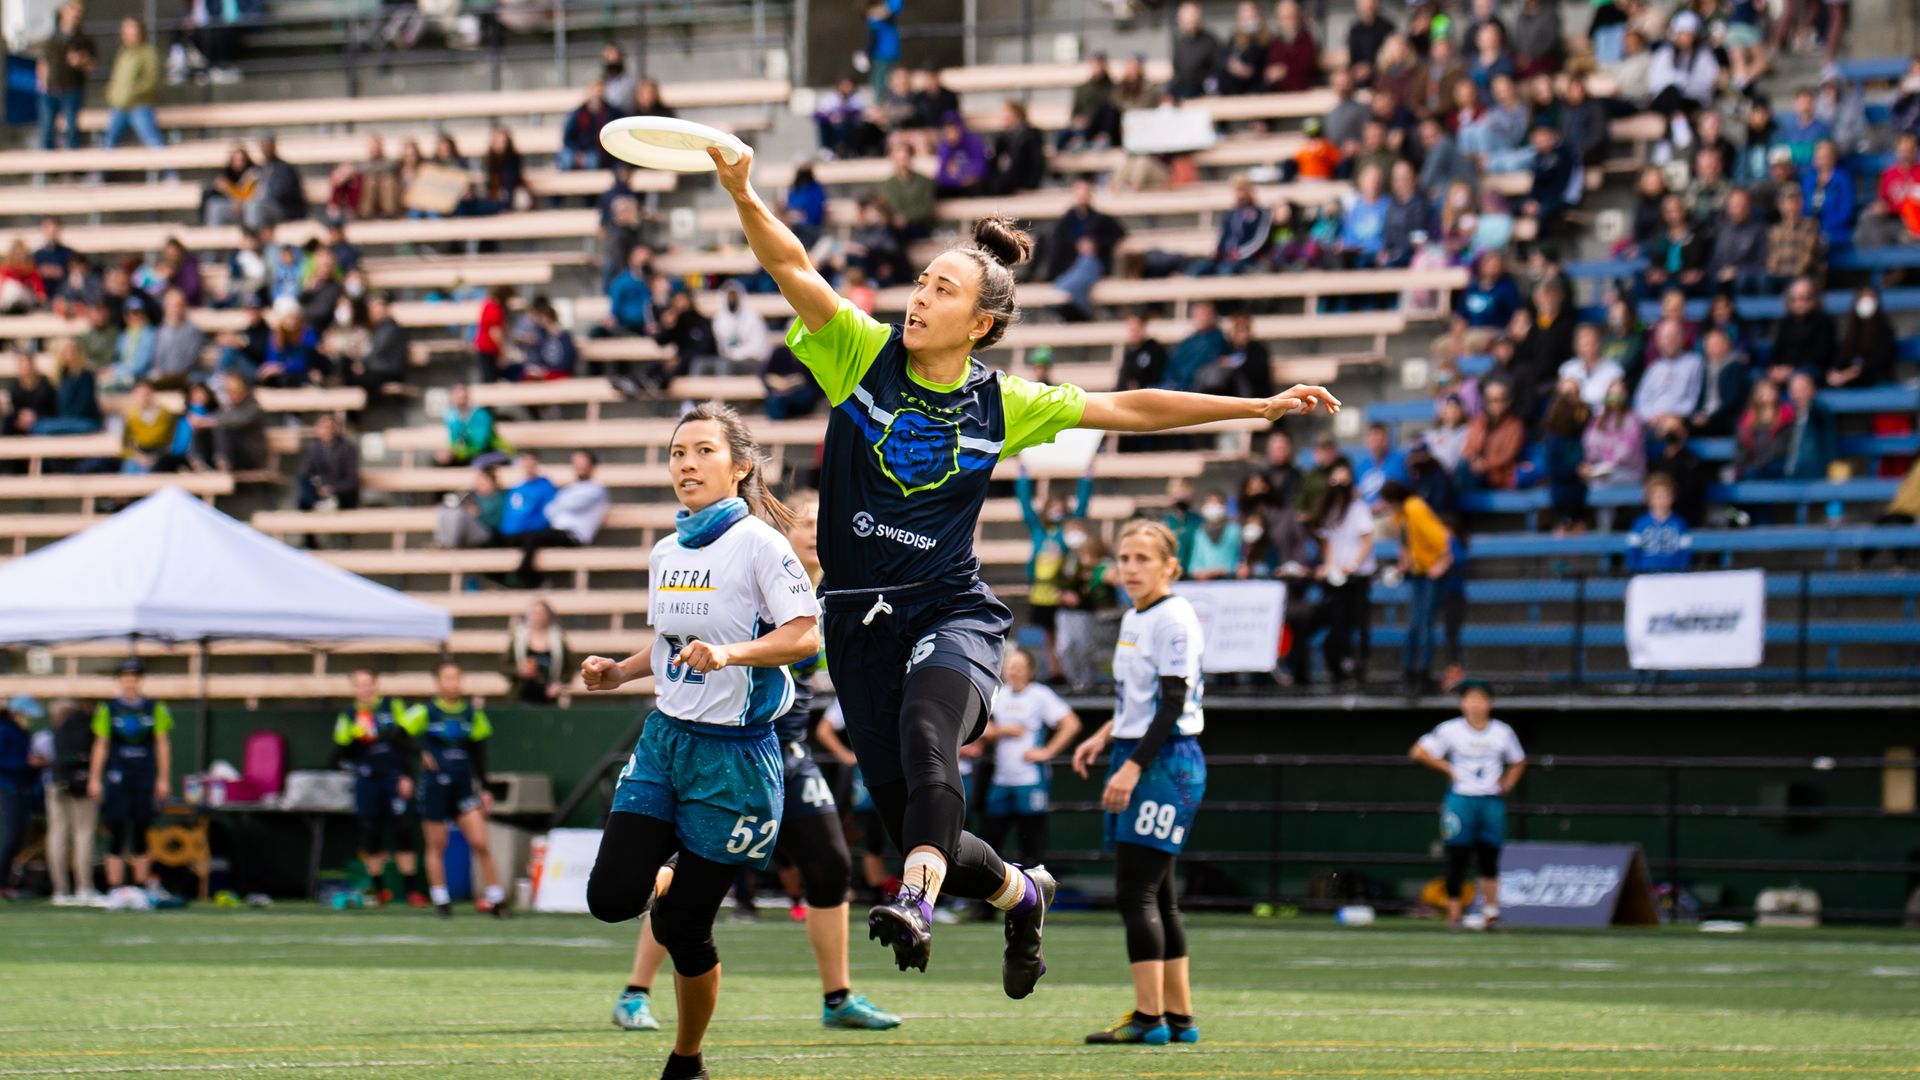 Female ultimate frisbee player soars in the air while making a catch.